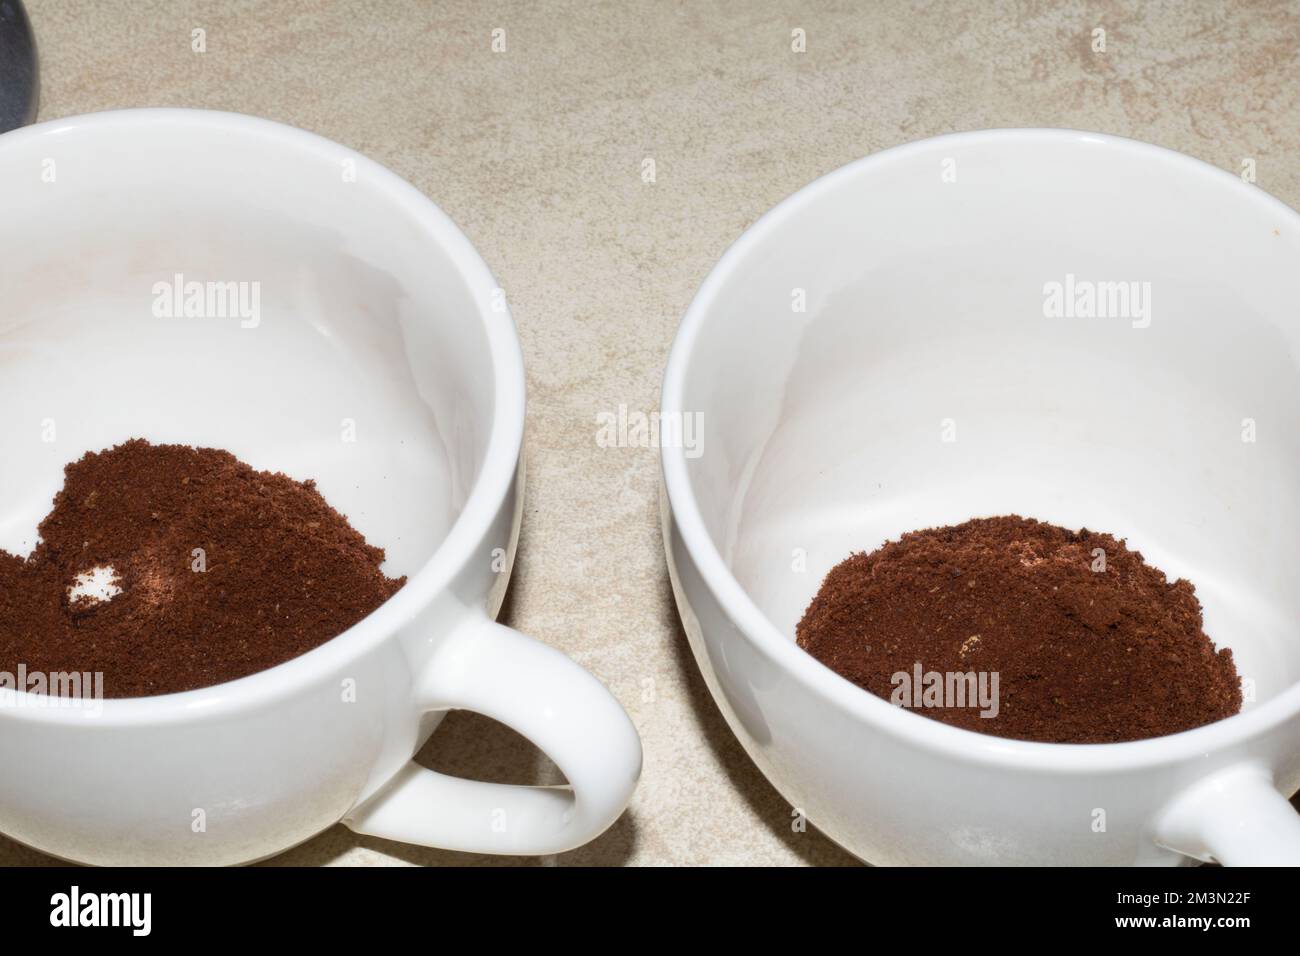 photo of ground coffee in two white cups on the table Stock Photo